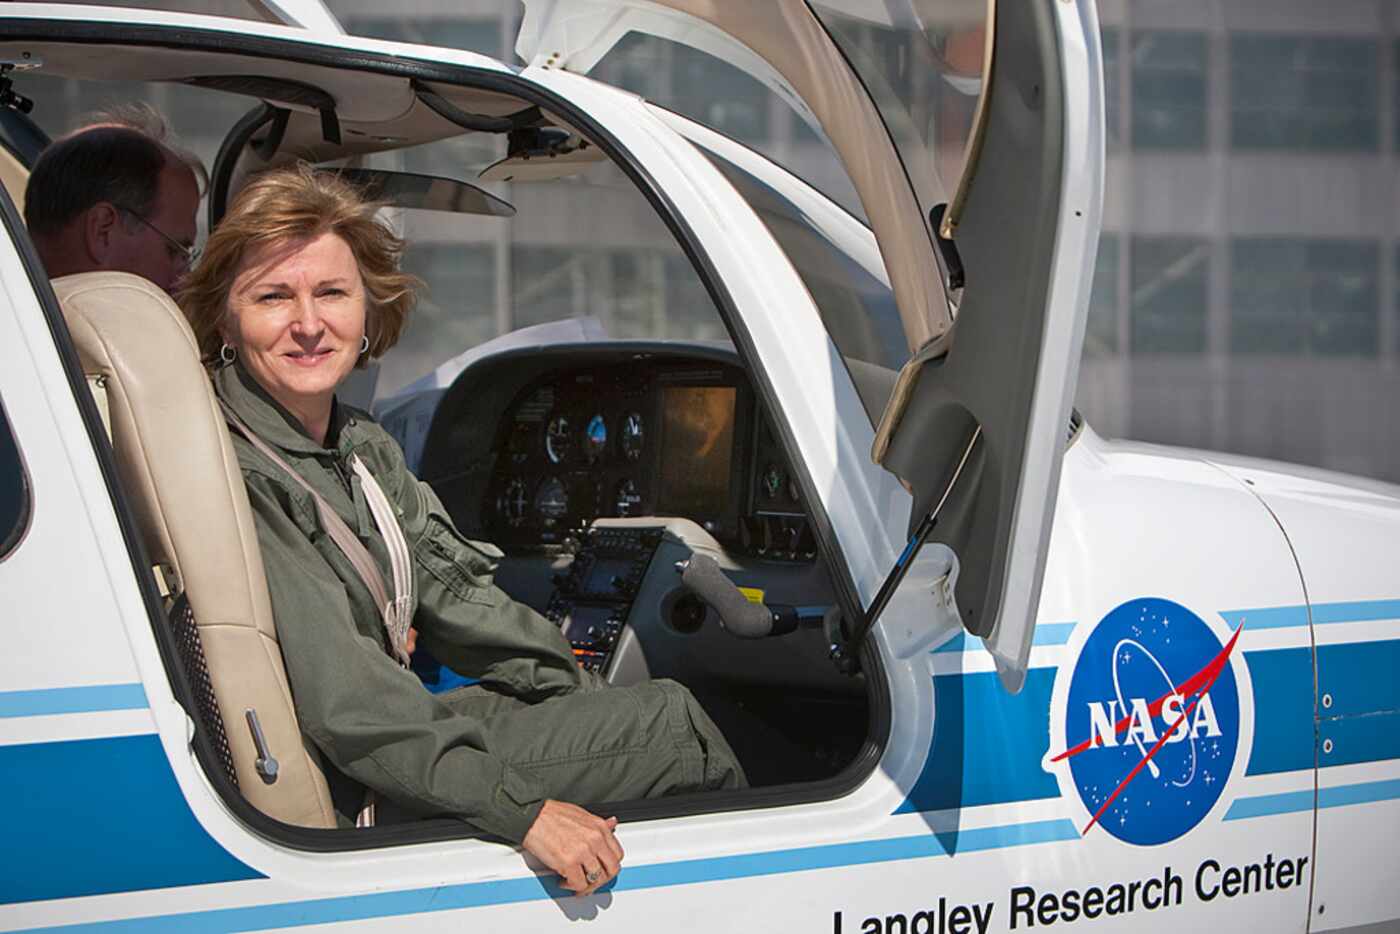 Lesa Roe at NASA Langley Research Center in Hampton, Va., getting ready for a research...